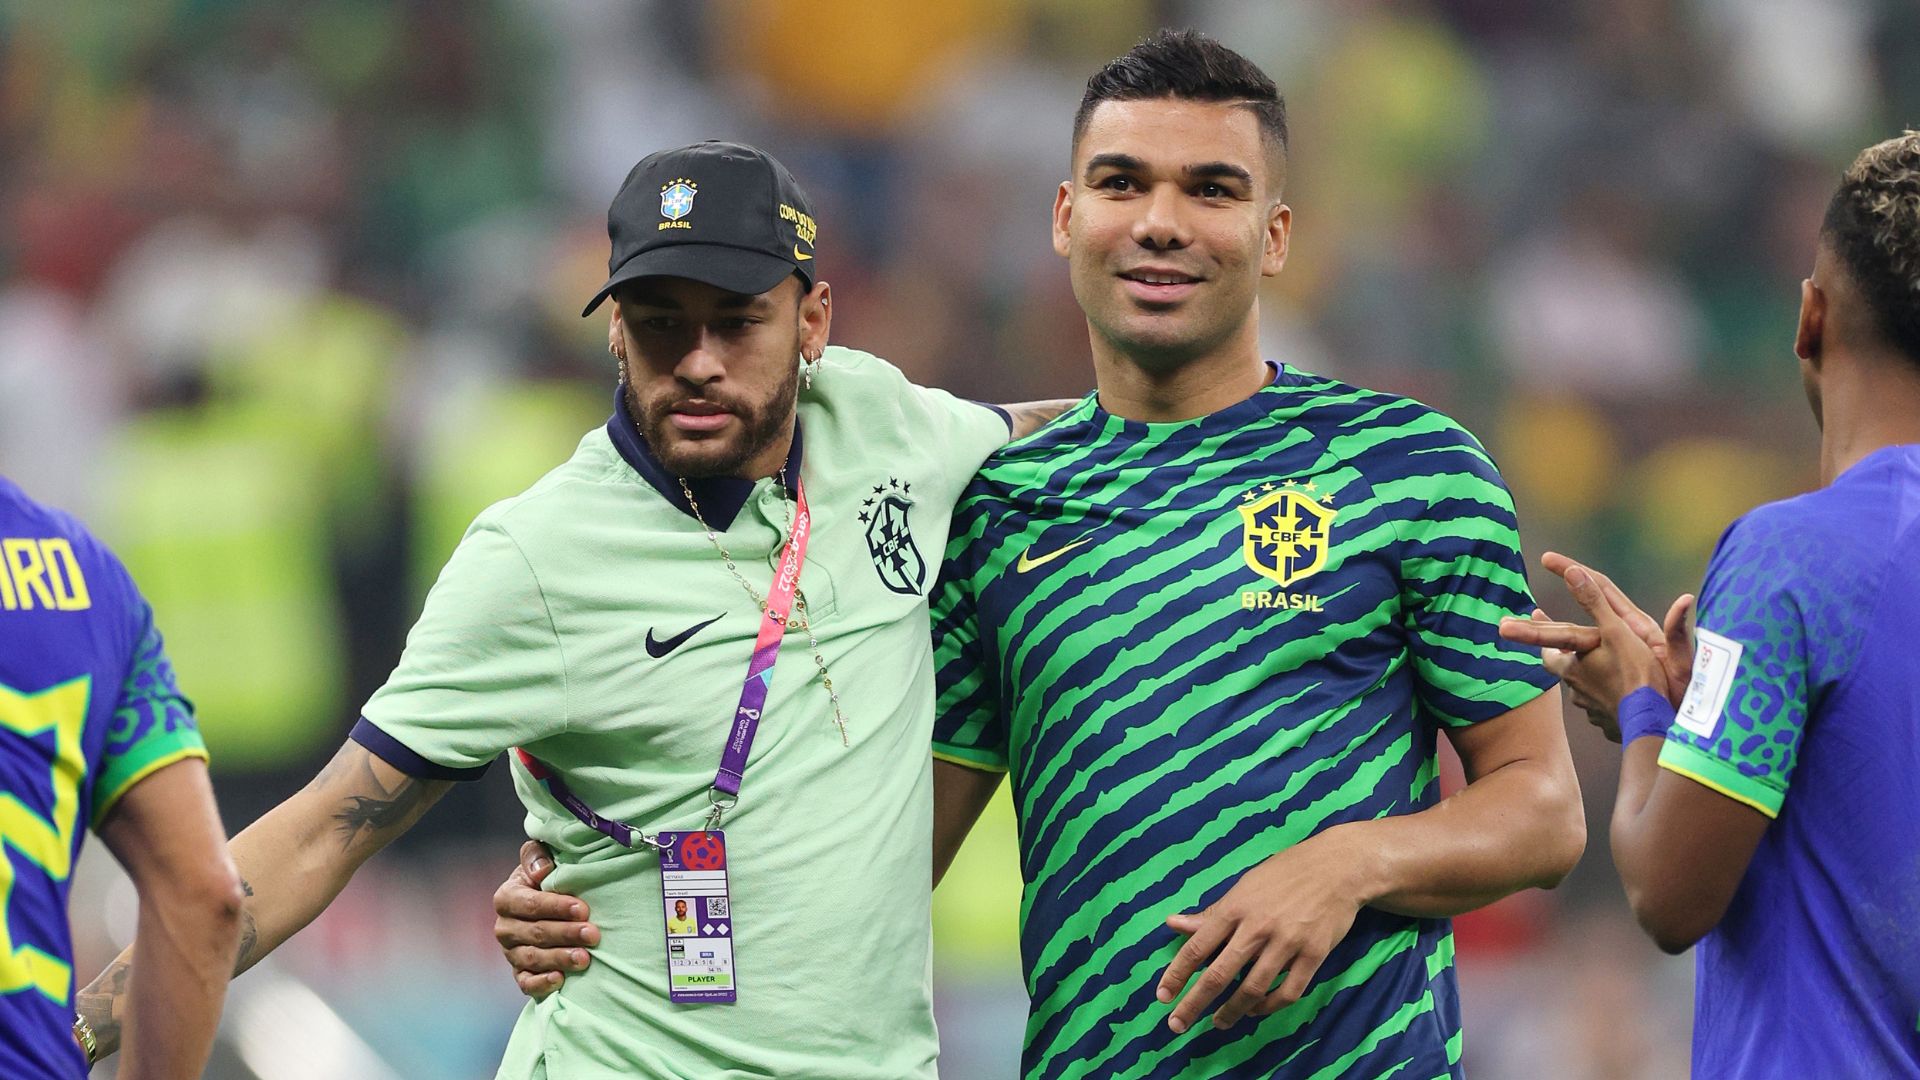 Neymar together with Casemiro, one of the highlights of Manchester United (Credit: Getty Images)